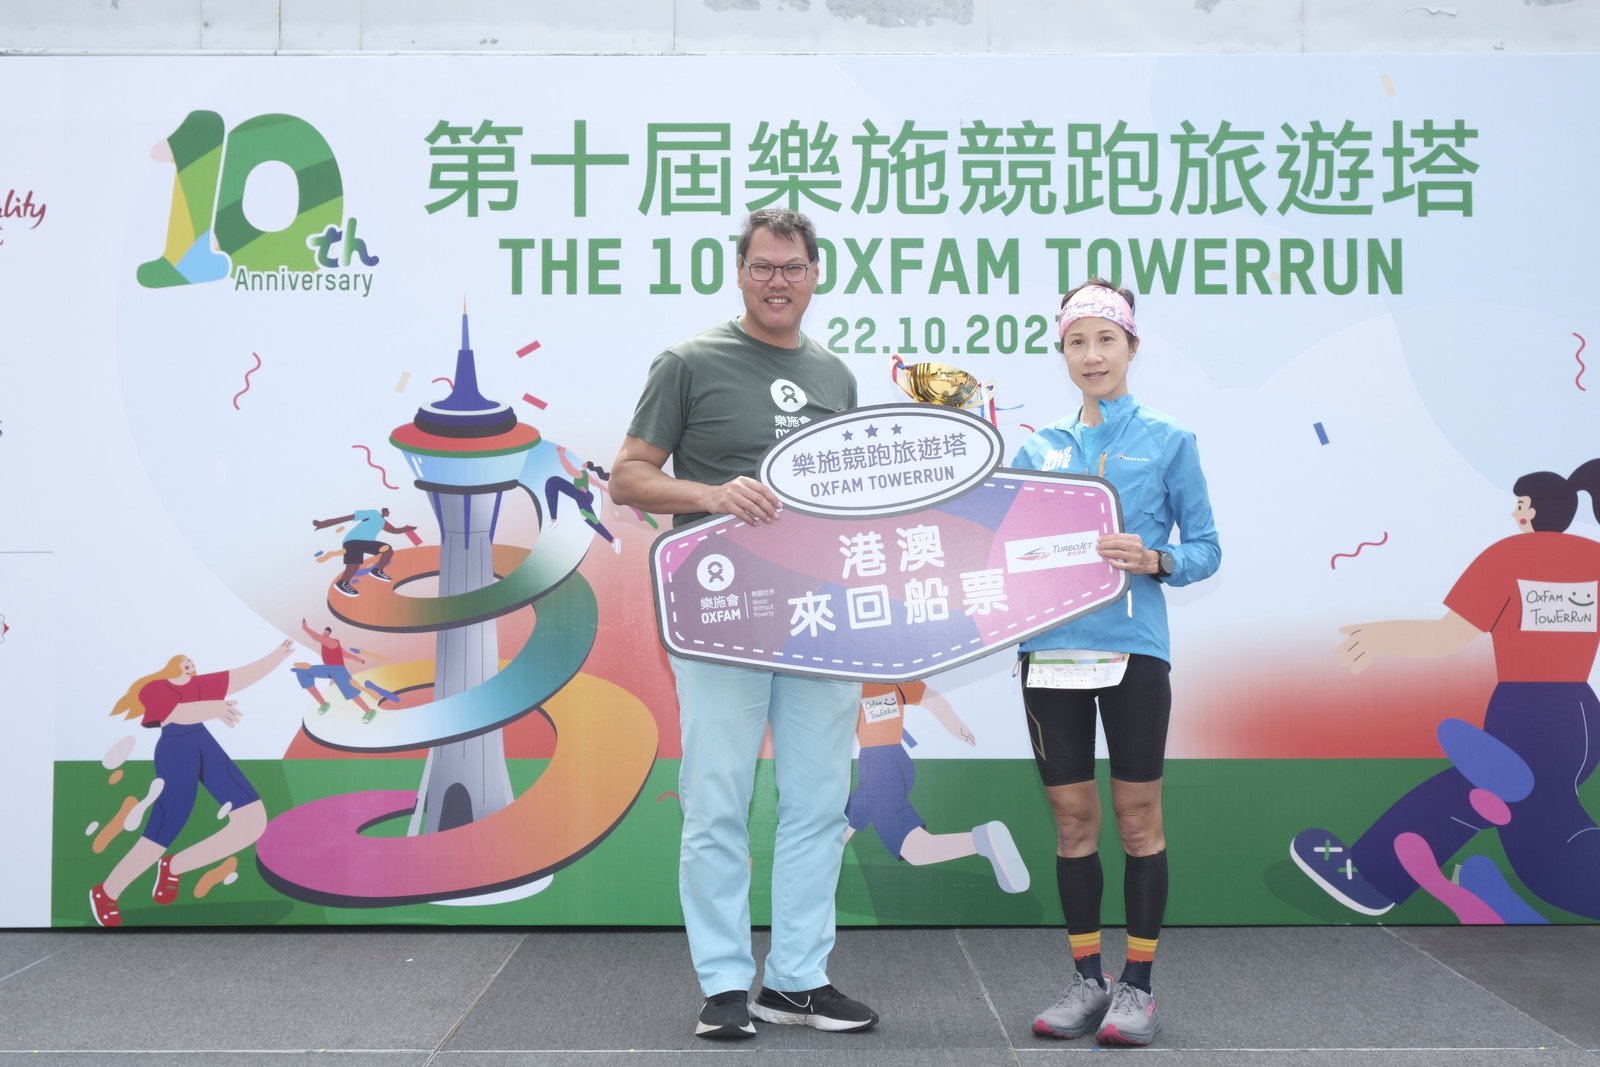 In the ‘Individual Challenge’ women’s race for the half tower, the champion was WONG KIT MUI from Hong Kong, who finished the race in 5 minutes and 48 seconds.